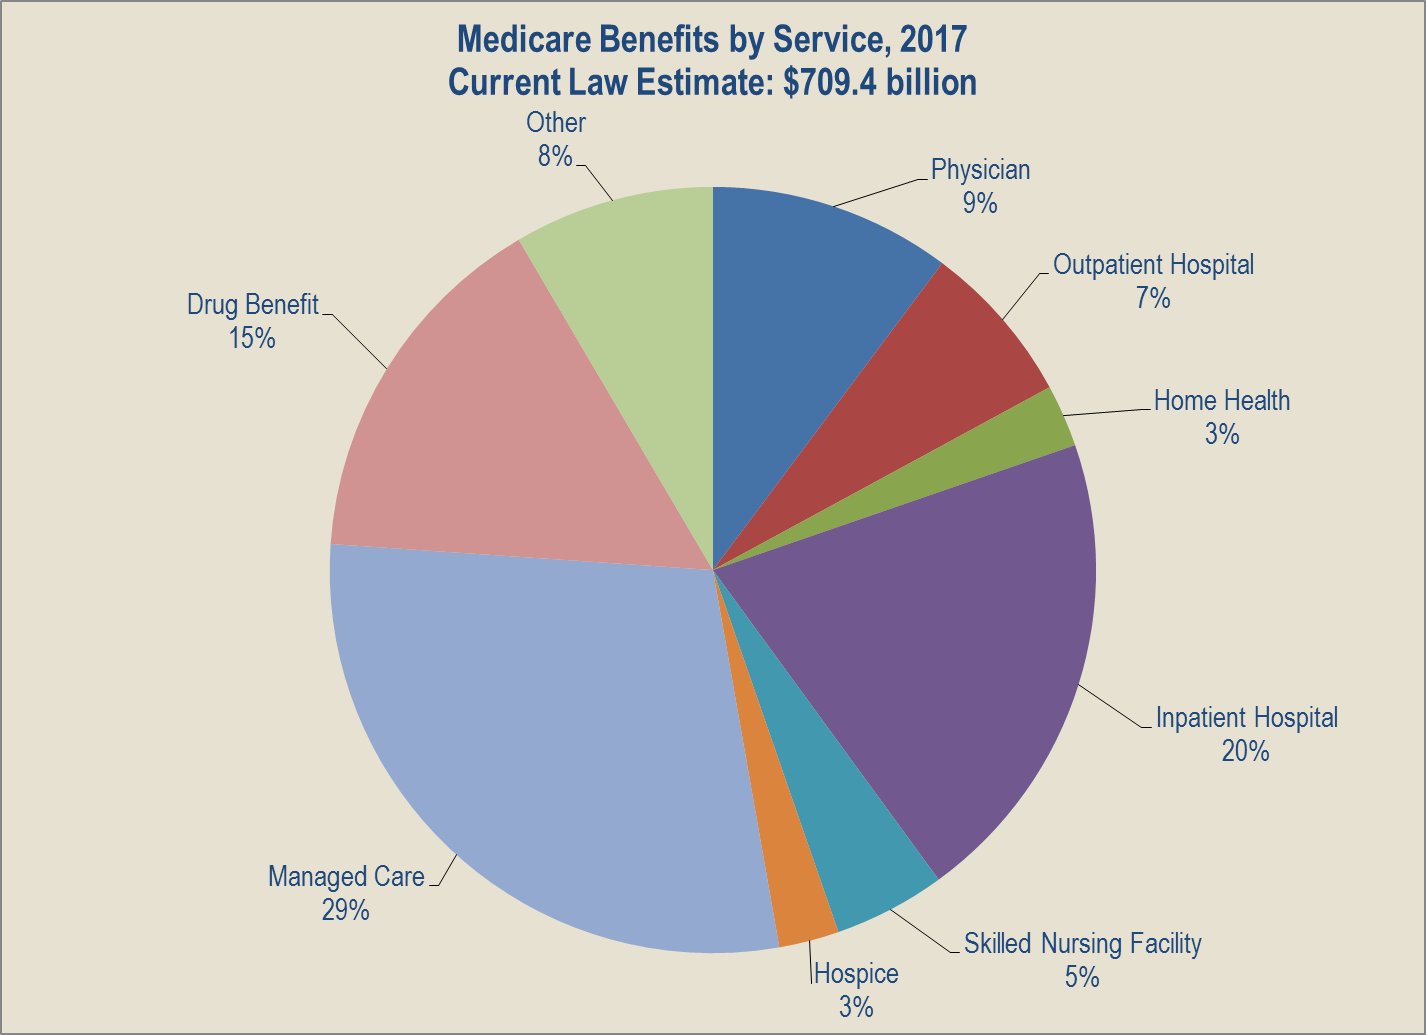 Medicare Benefits by Service 2017